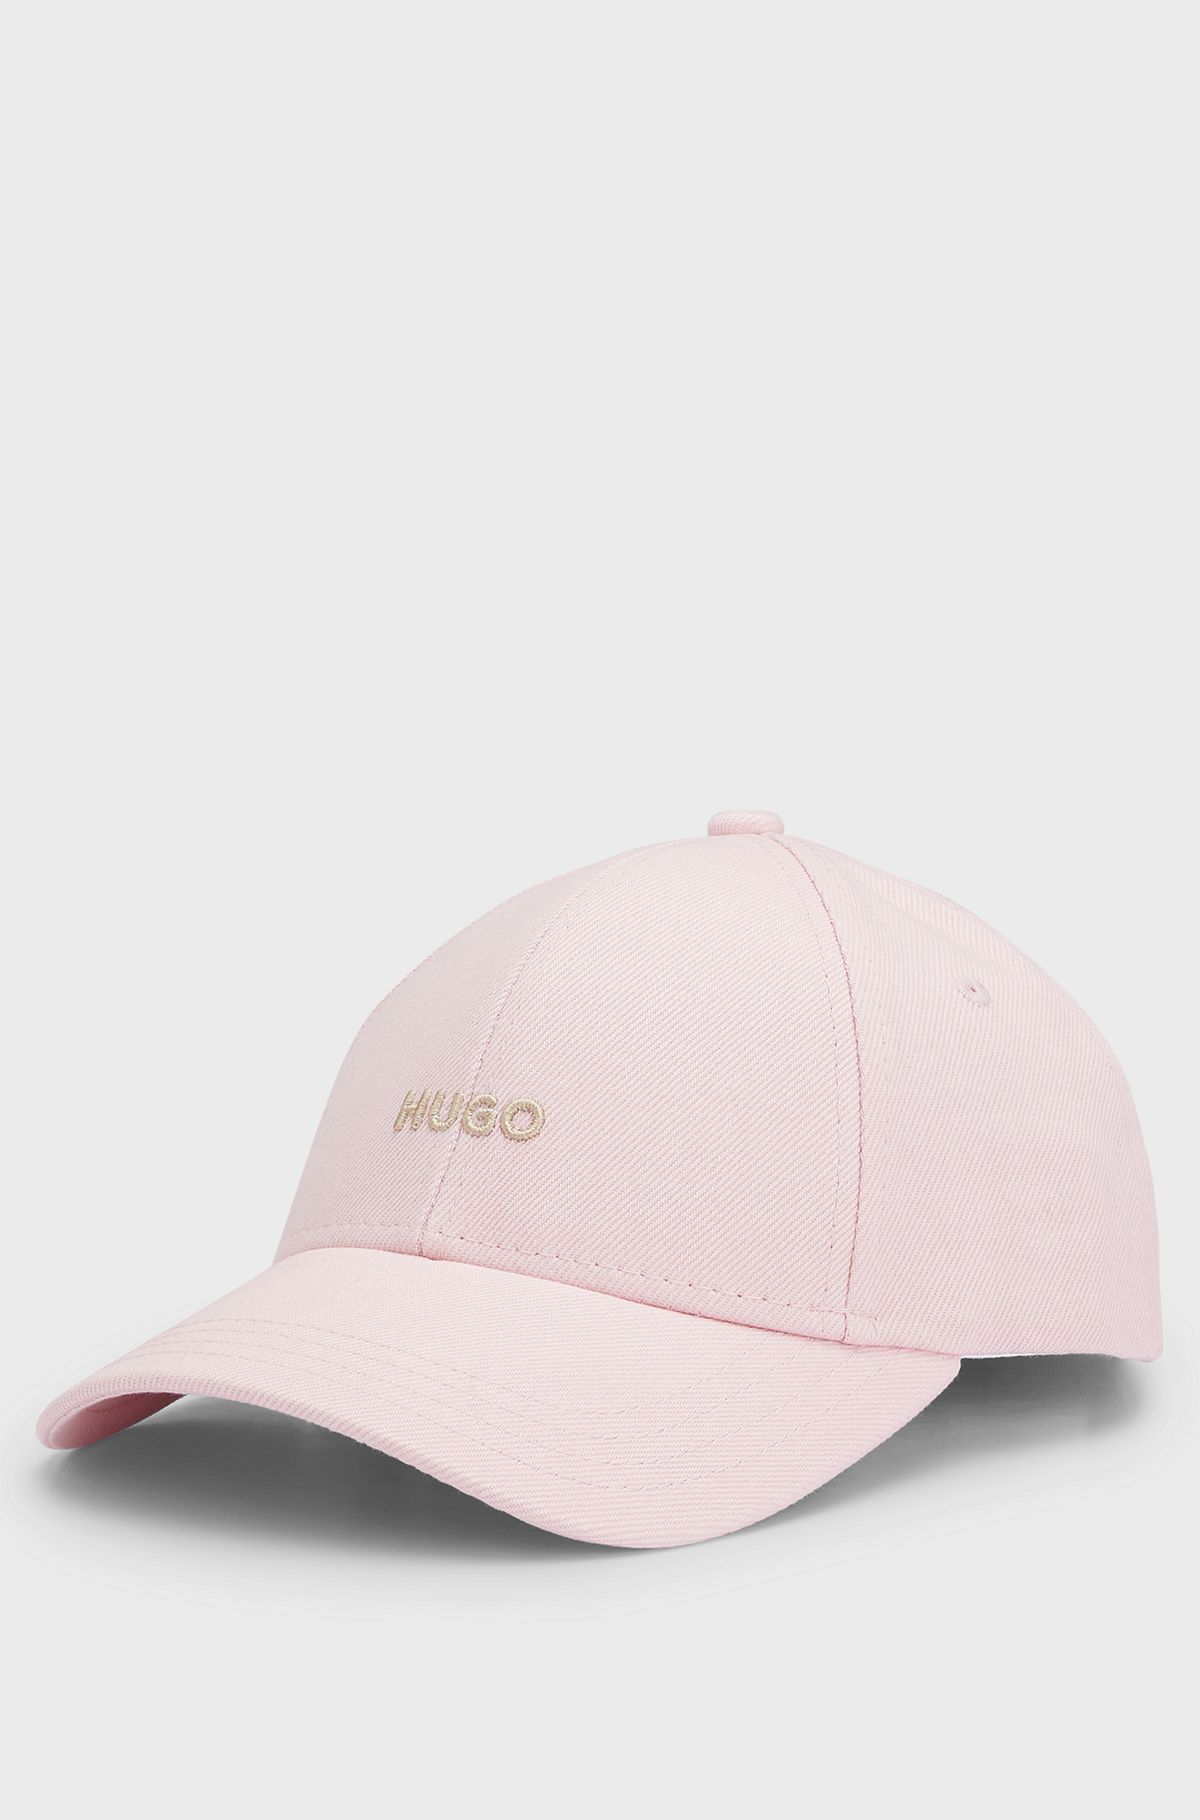 Cotton-denim cap with embroidered logo, light pink